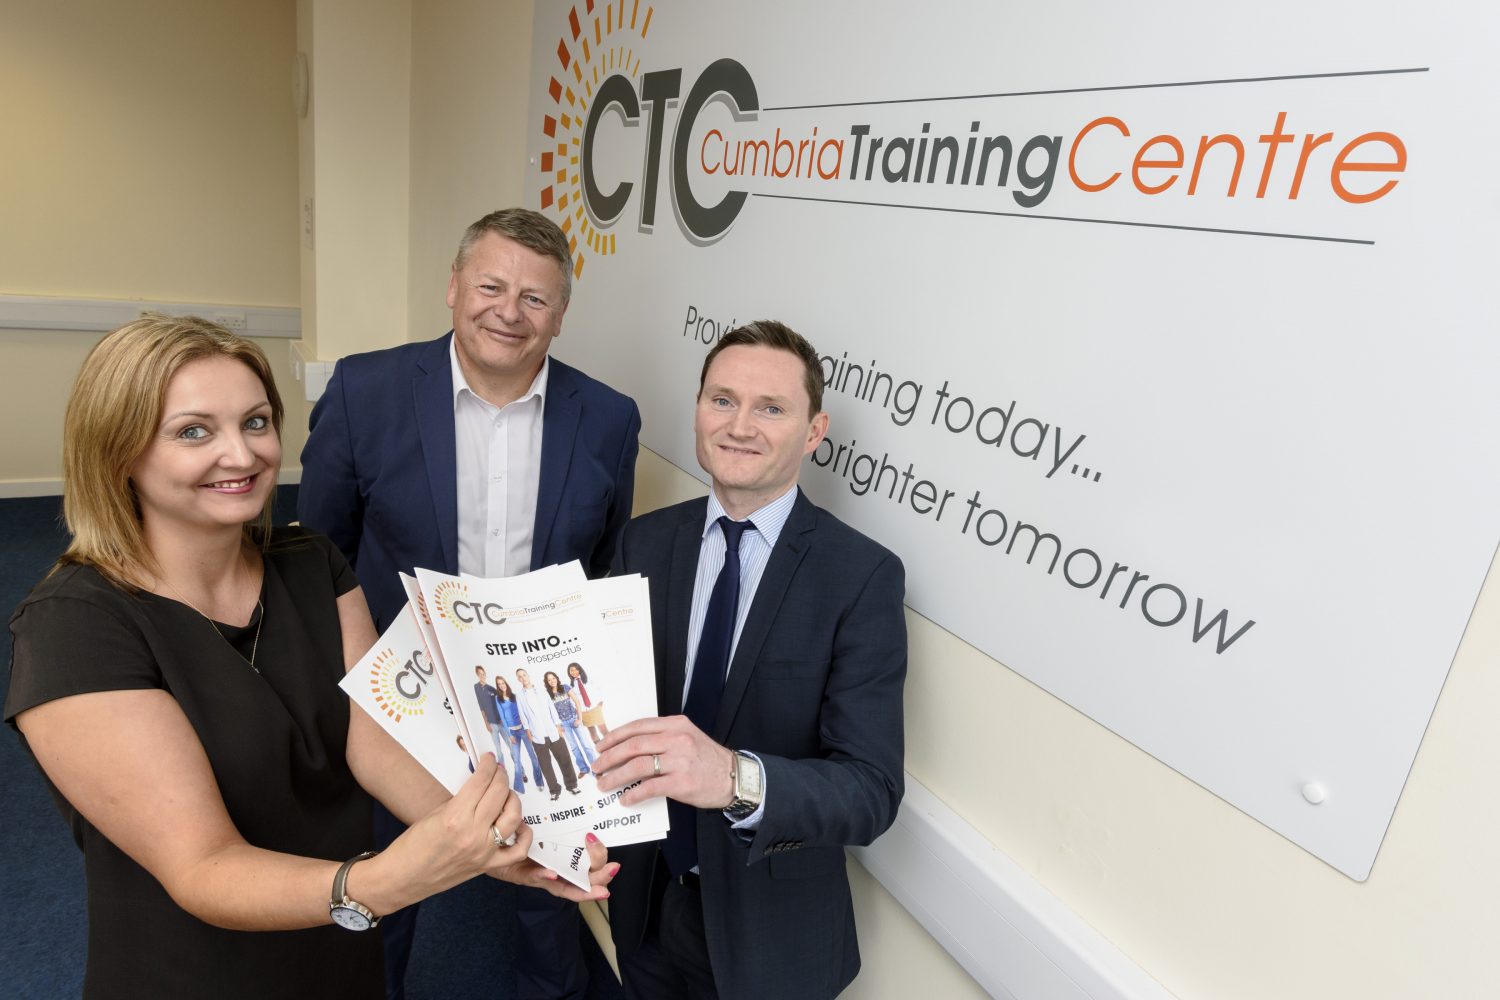 Three people in an office standing near a wall with a poster of CTC Cumbria Training Centre poster. There is one woman to the far let with light brown hair wearing a black tee shirt holding some brochures and another man to the far right wearing a blue suit and blue tie also holding the brochures.